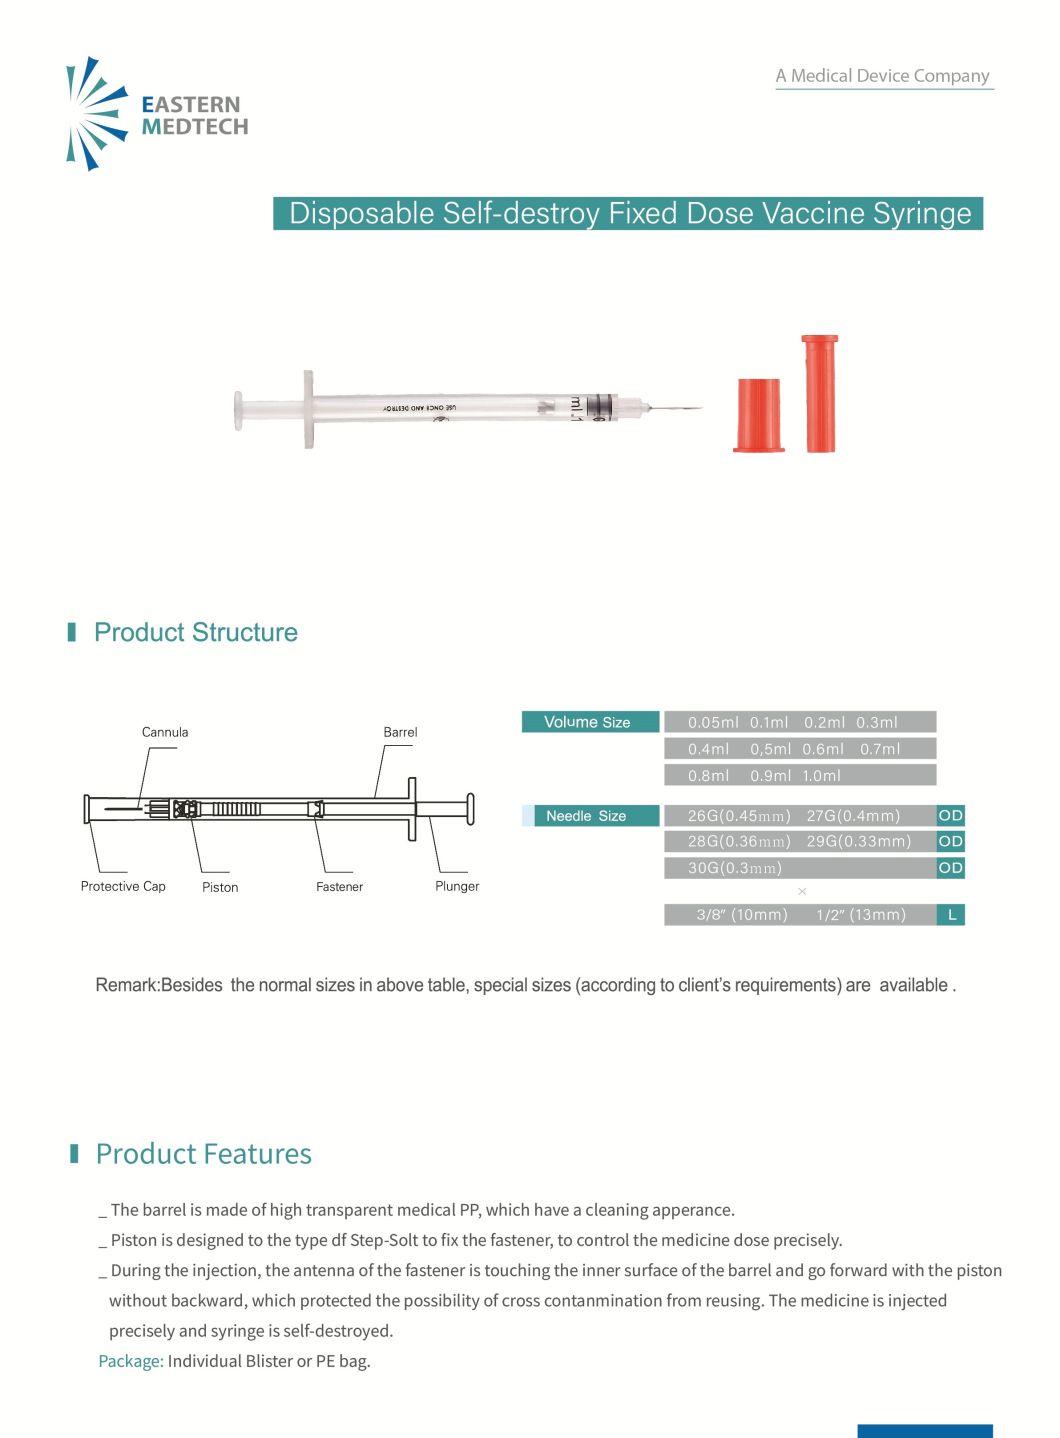 Disposable Medical Device Self-Destroy Vaccine Syringe with Fixed Needle